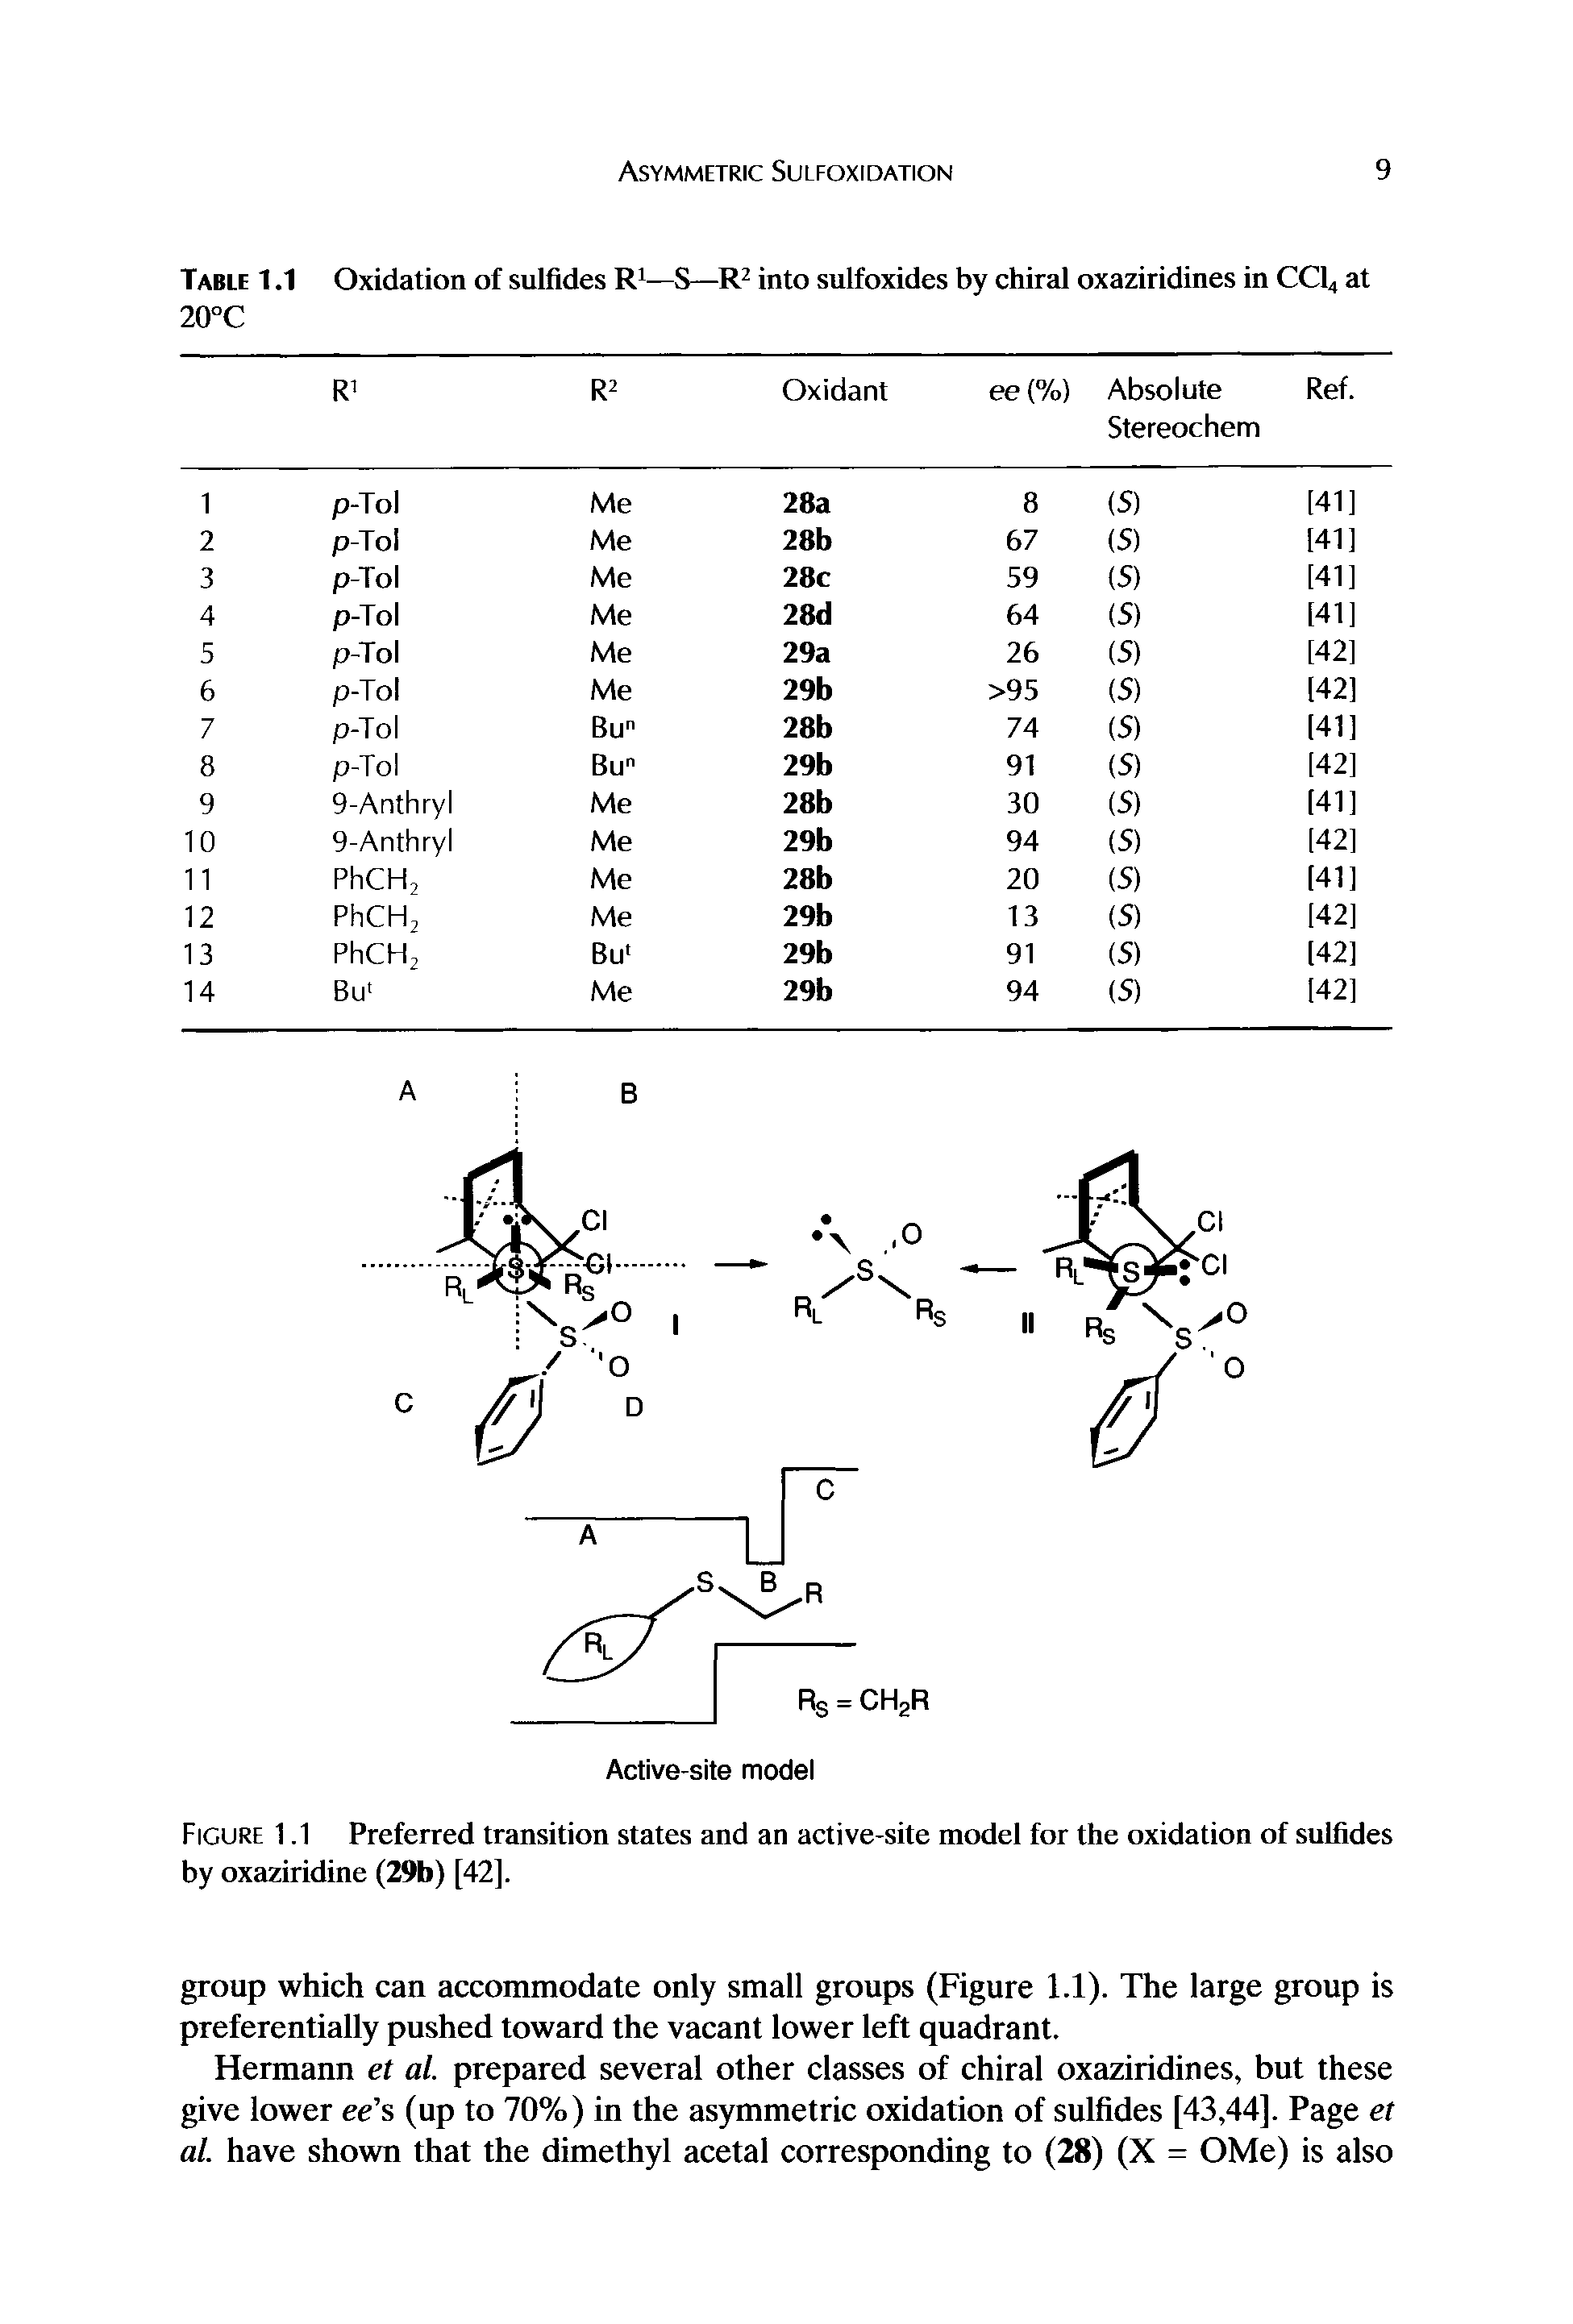 Figure 1.1 Preferred transition states and an active-site model for the oxidation of sulfides by oxaziridine (29b) [42].